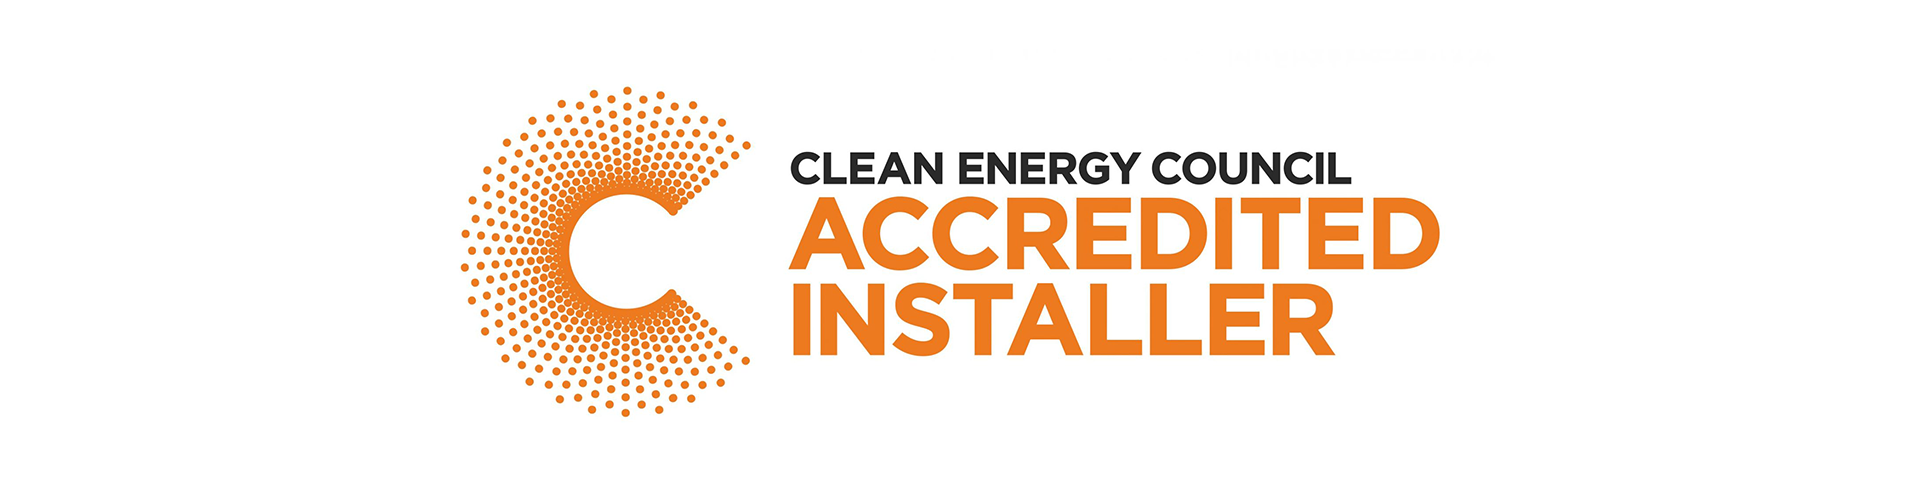 A clean energy council accredited installer logo on a white background